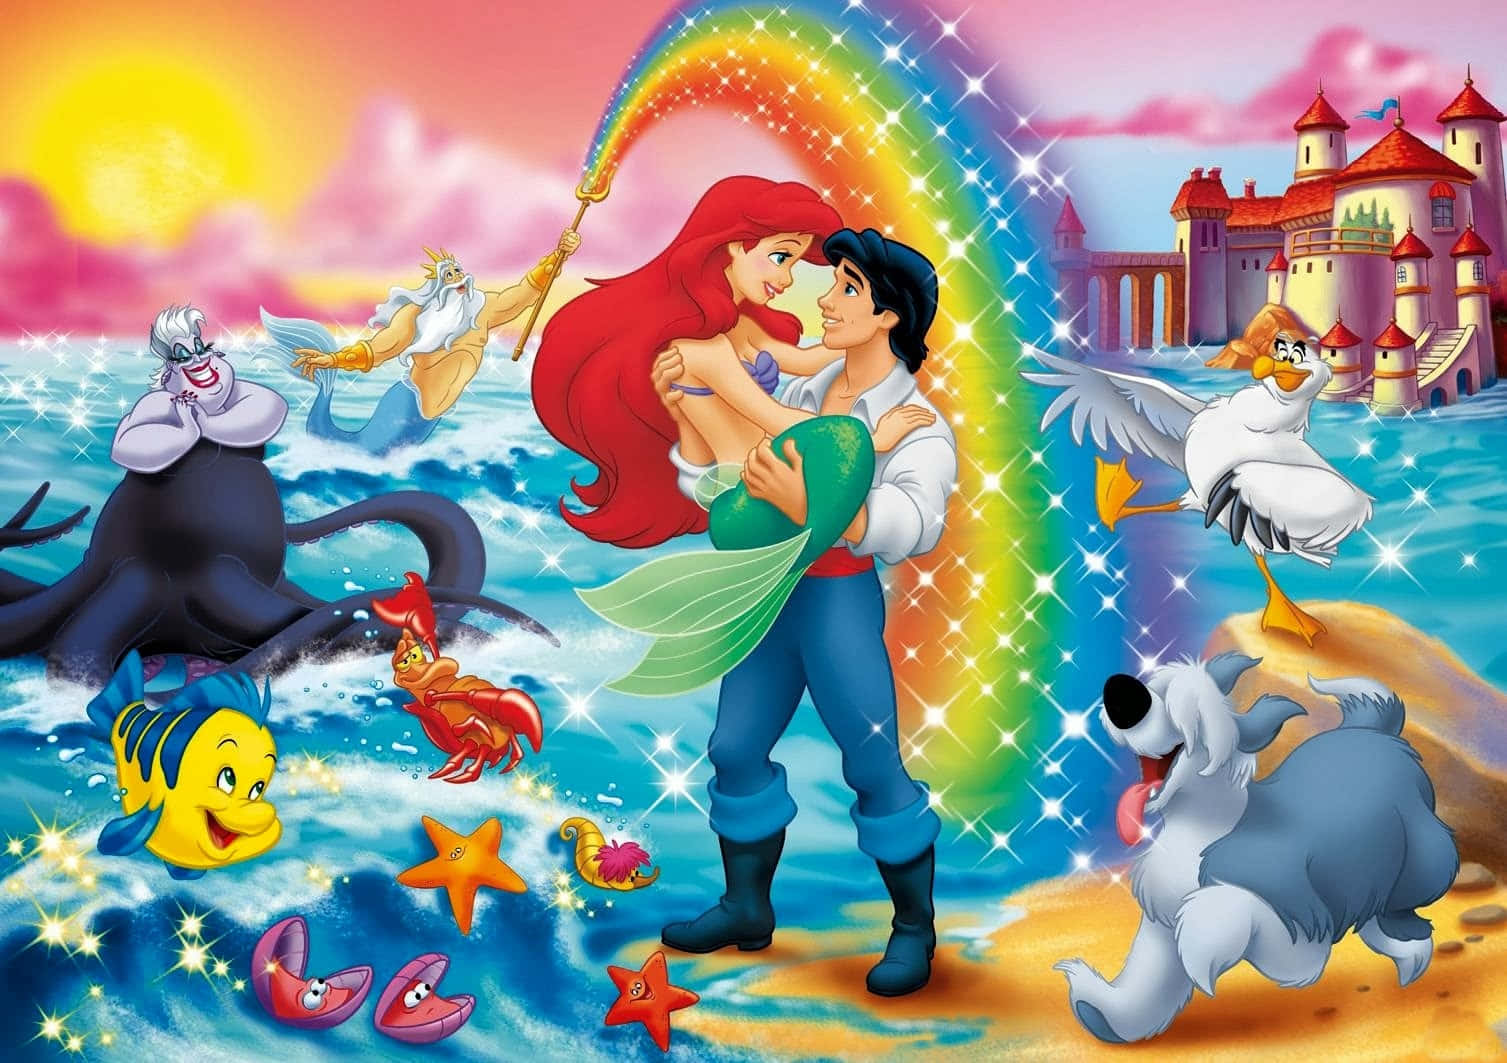 Ariel, the little mermaid, marveling at the world above the sea